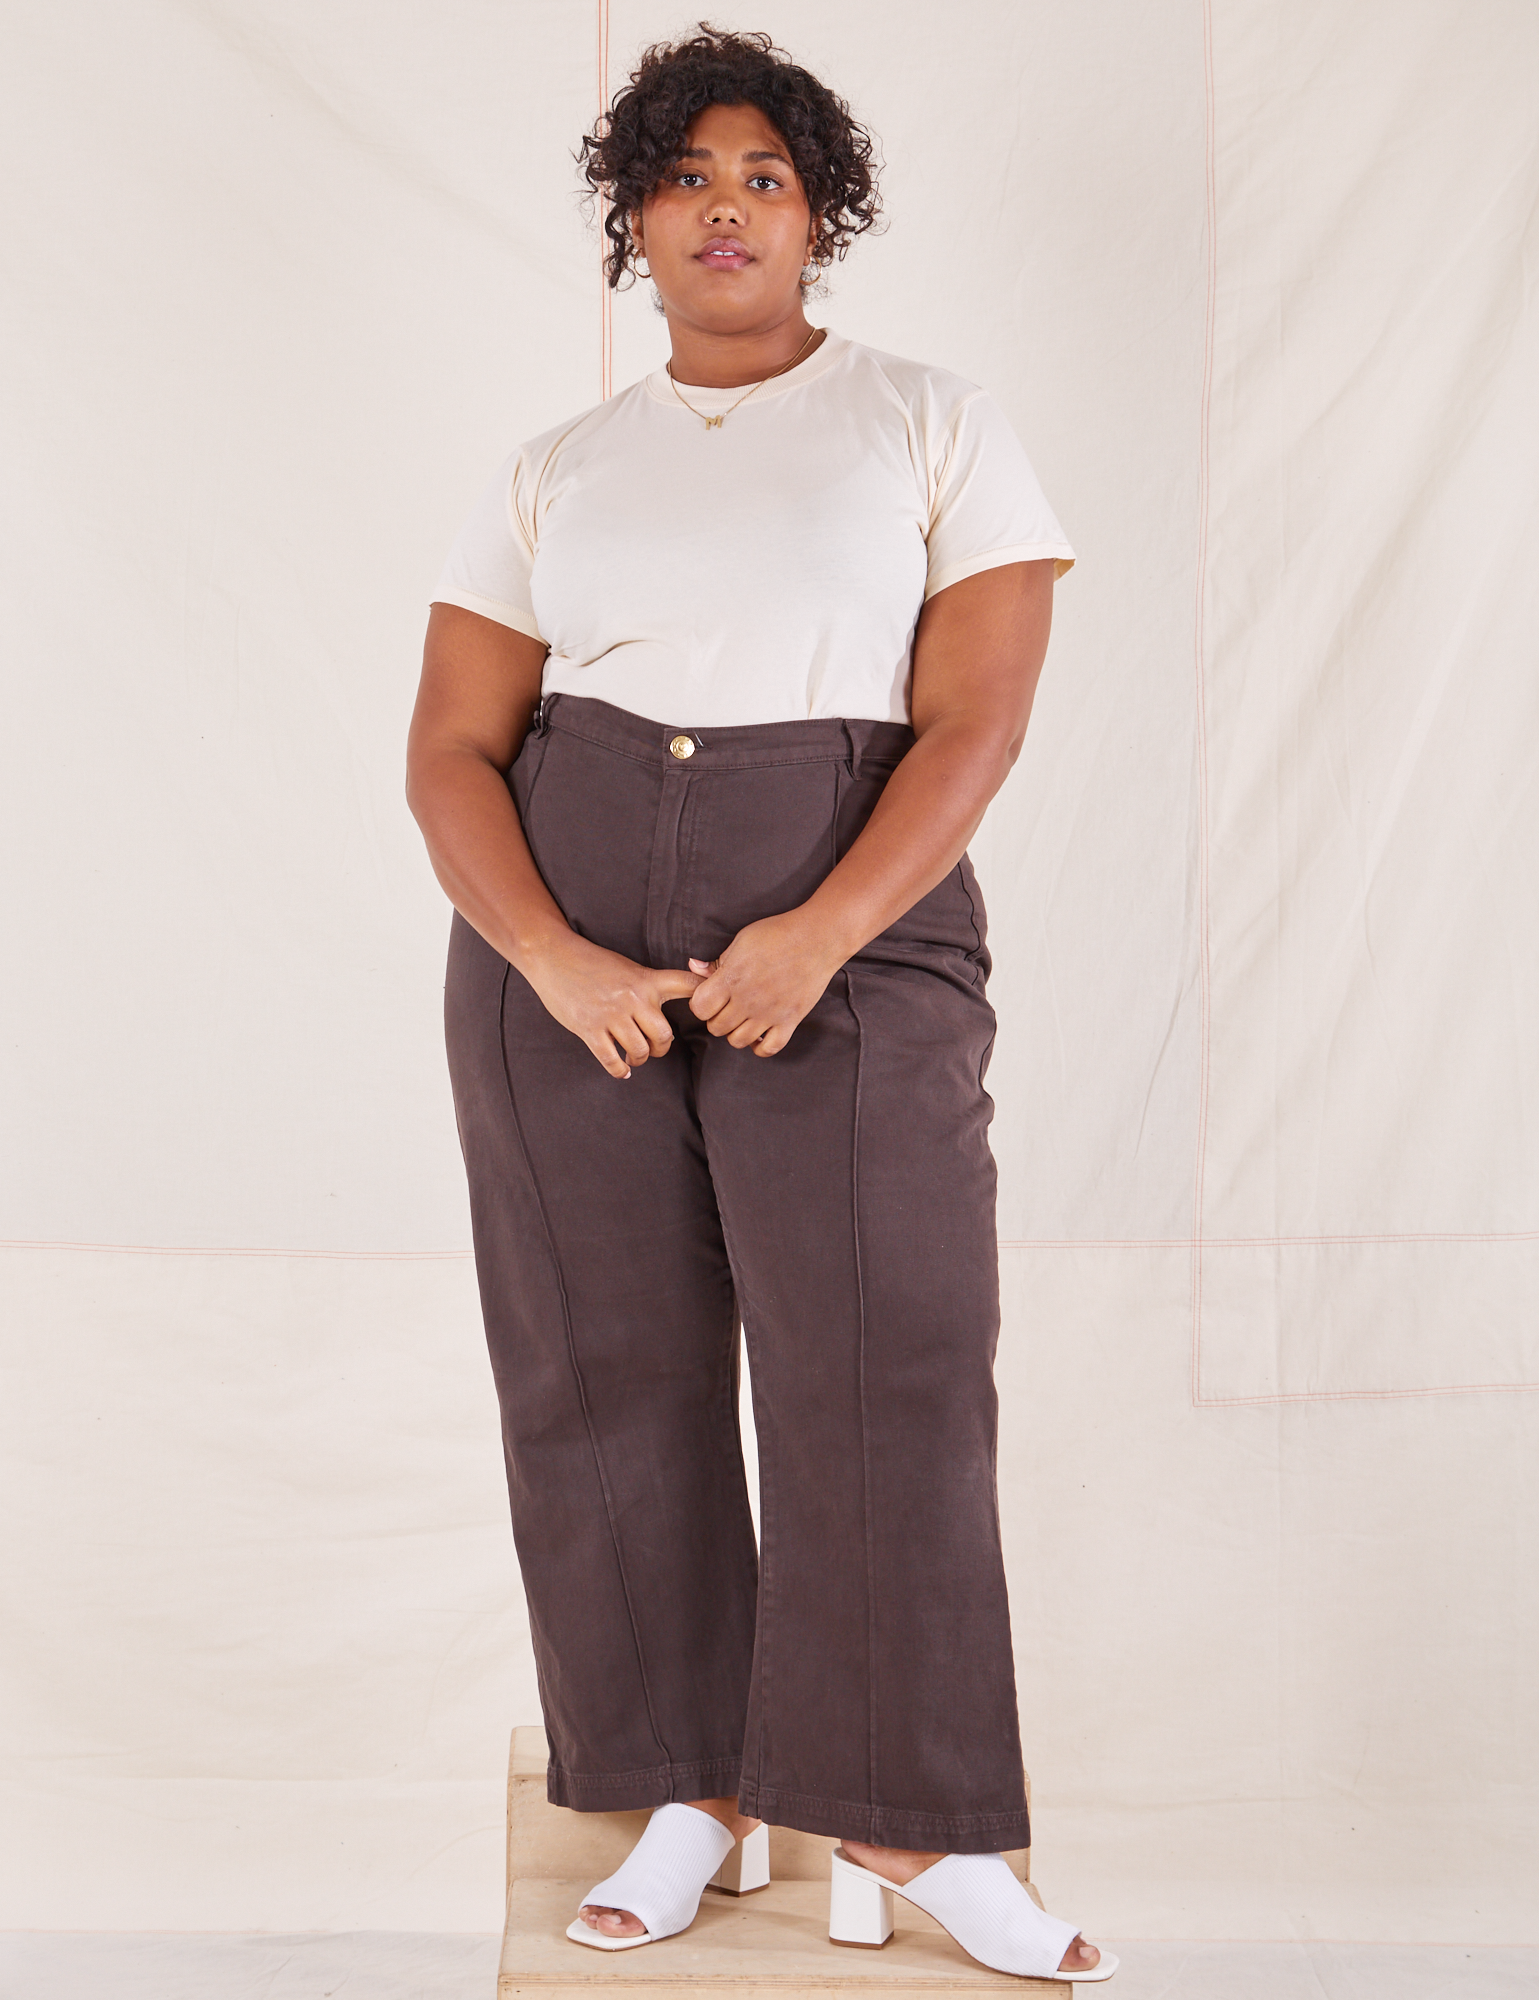 Morgan is wearing L Organic Vintage Tee in Vintage Off-White paired with espresso brown Western Pants